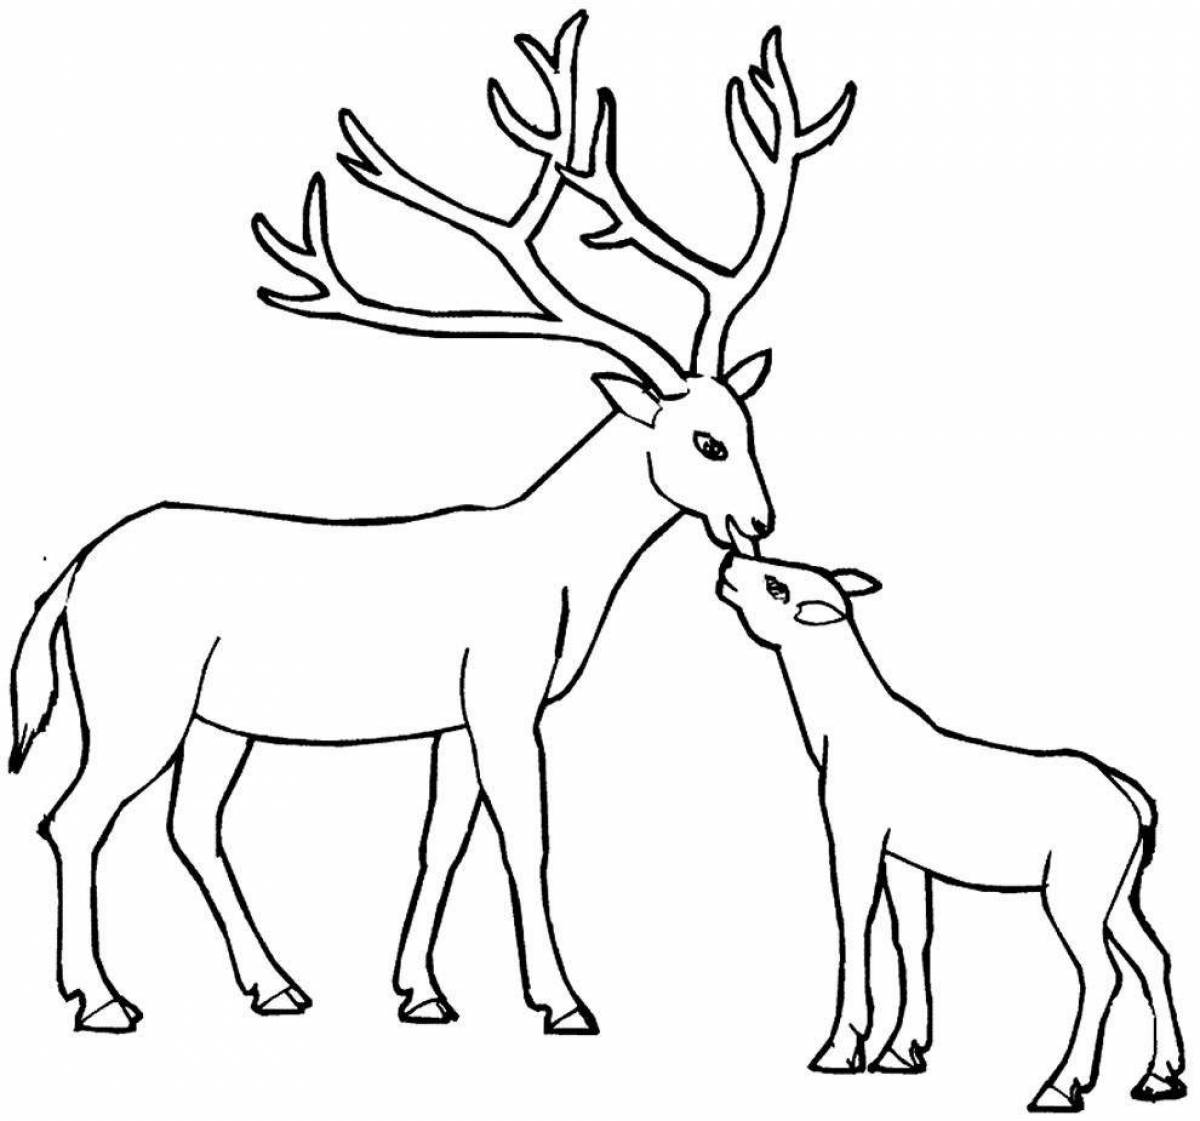 Colouring amiable reindeer